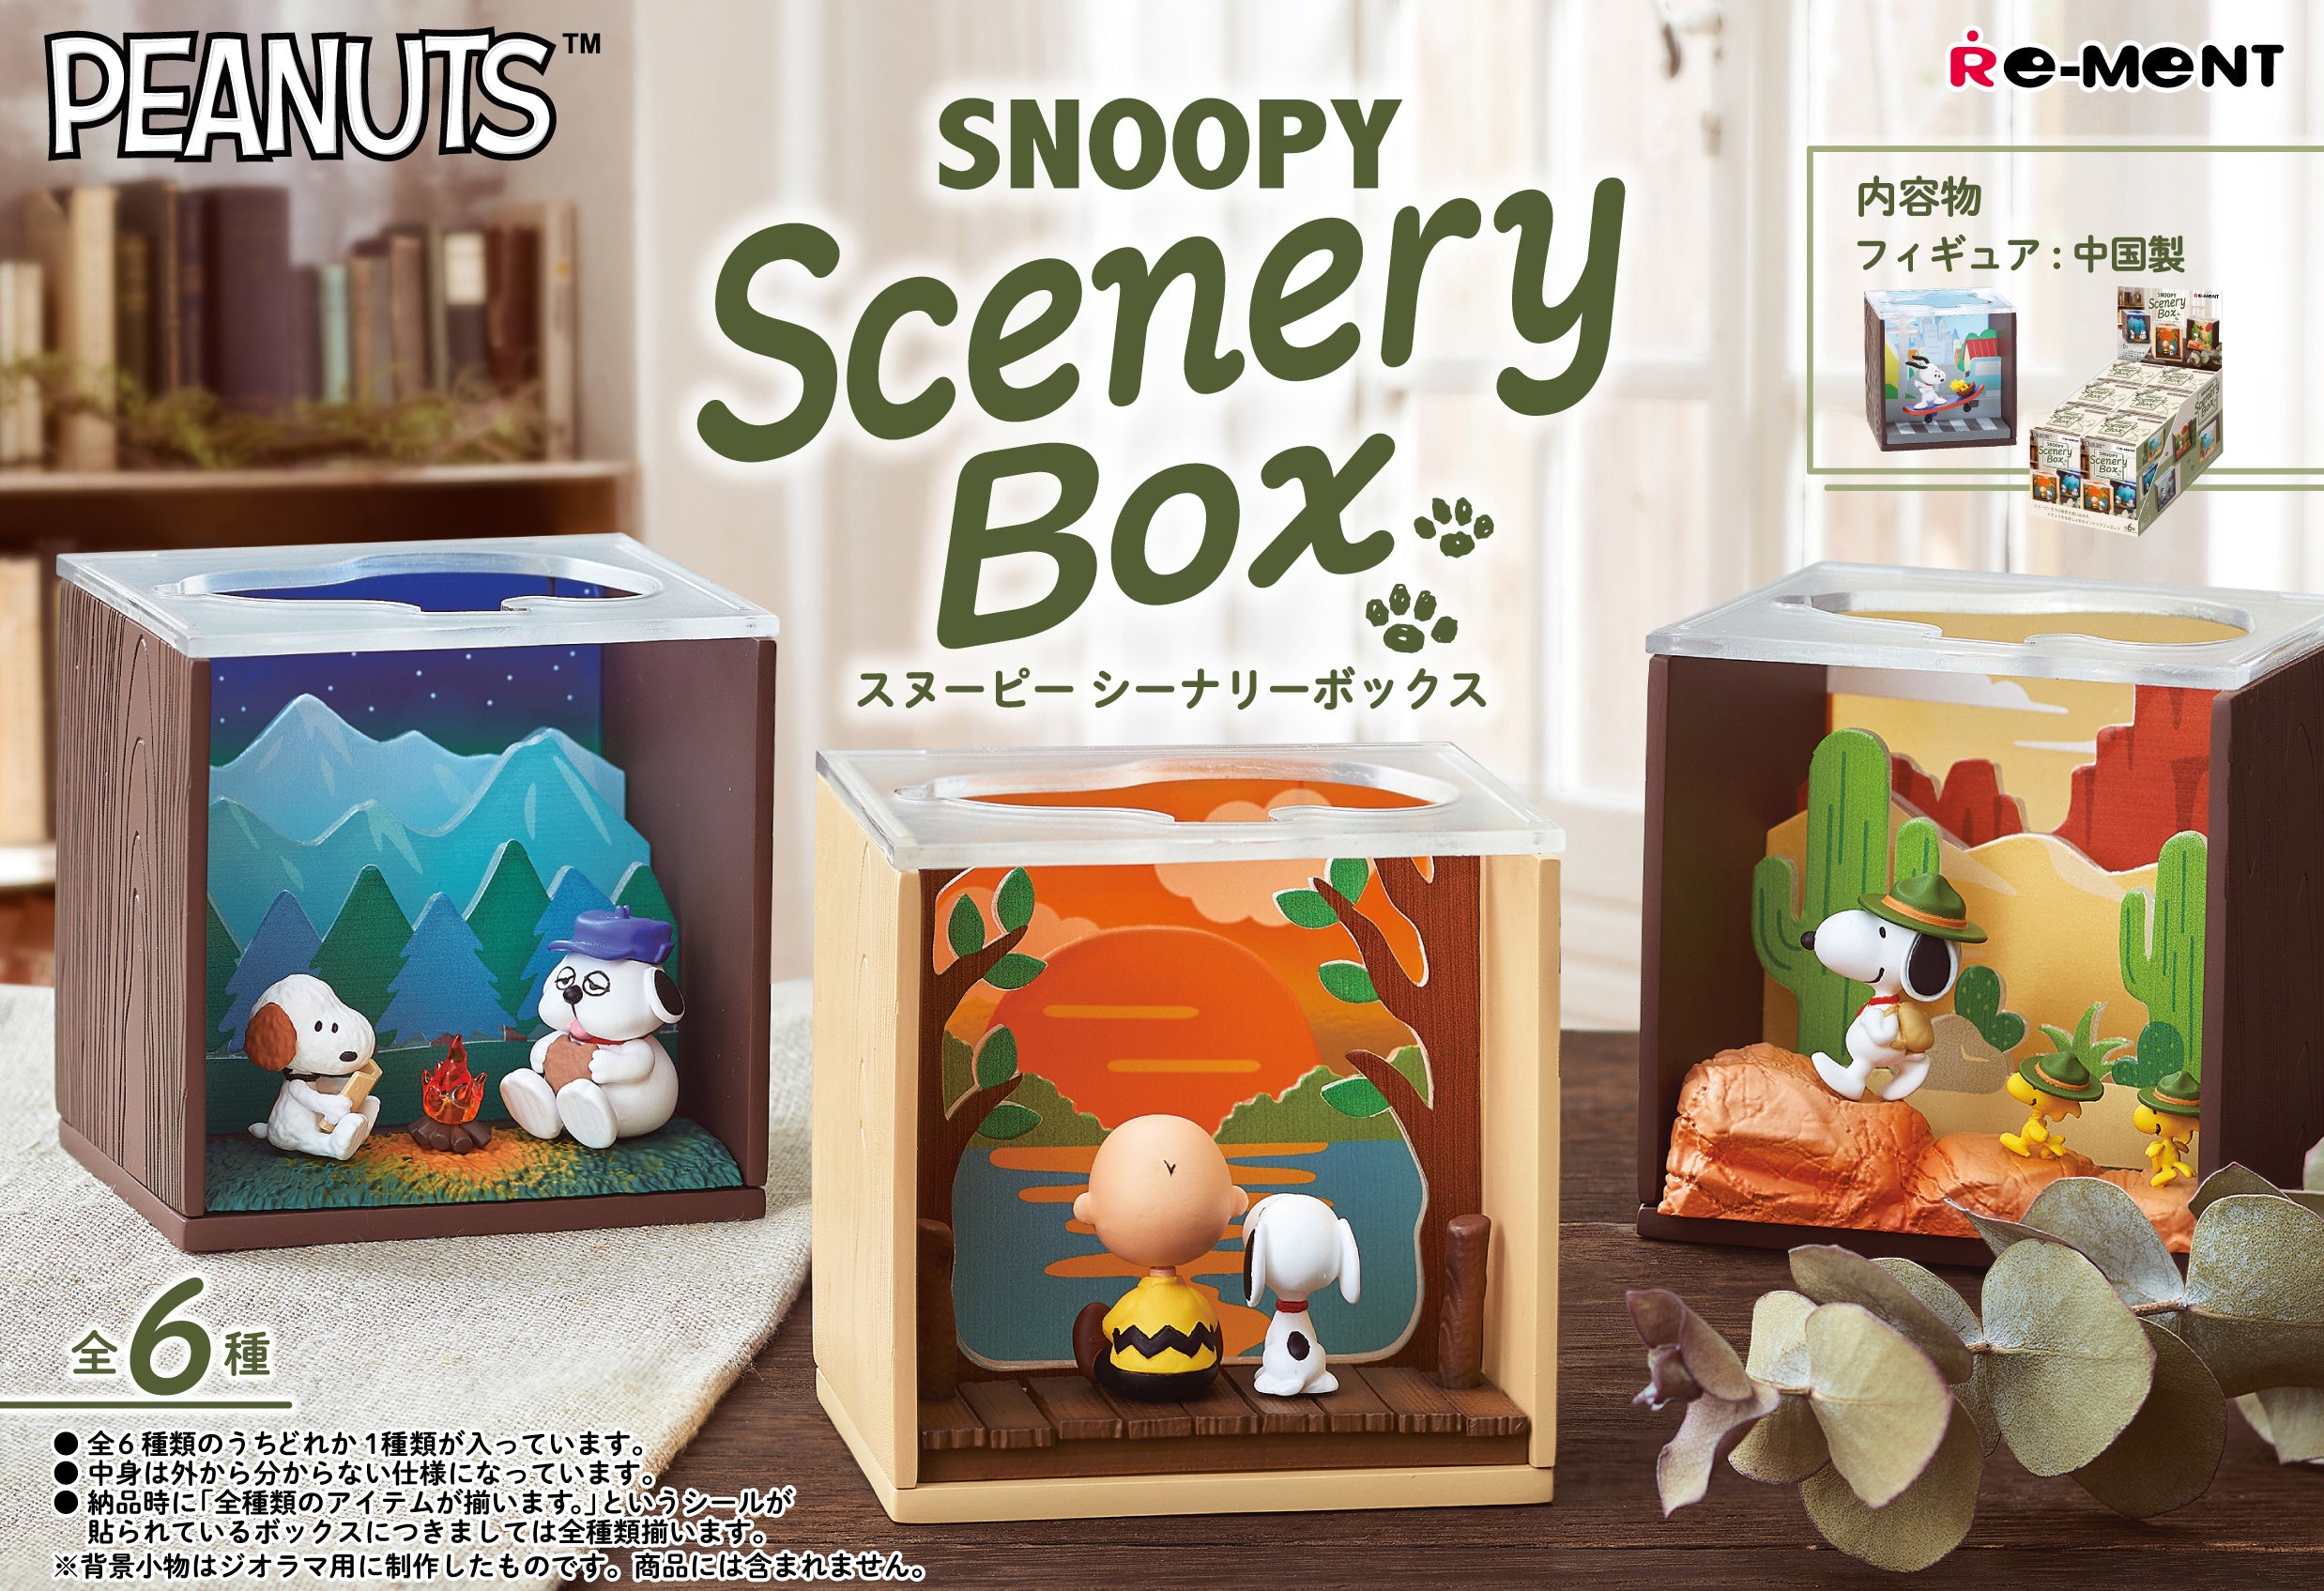 Re-Ment - Peanuts - Snoopy Scenery Box (Box of 6) - Marvelous Toys